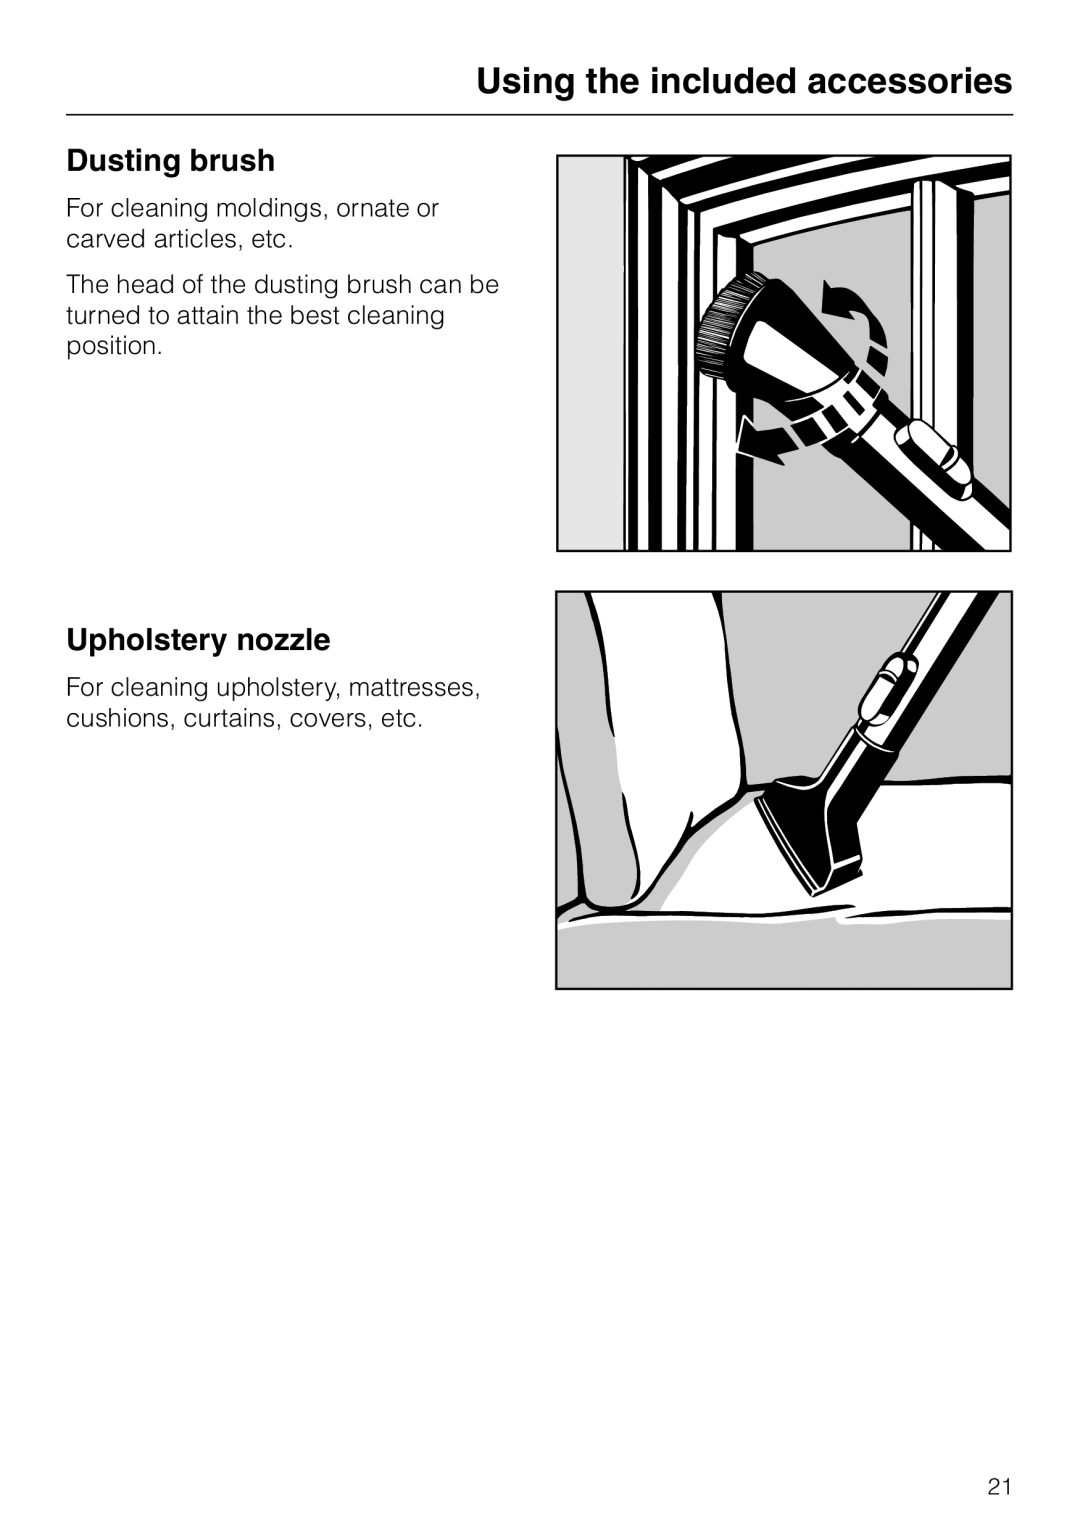 Miele S 648, S 600, S 548, S 500 operating instructions Using the included accessories, Dusting brush, Upholstery nozzle 